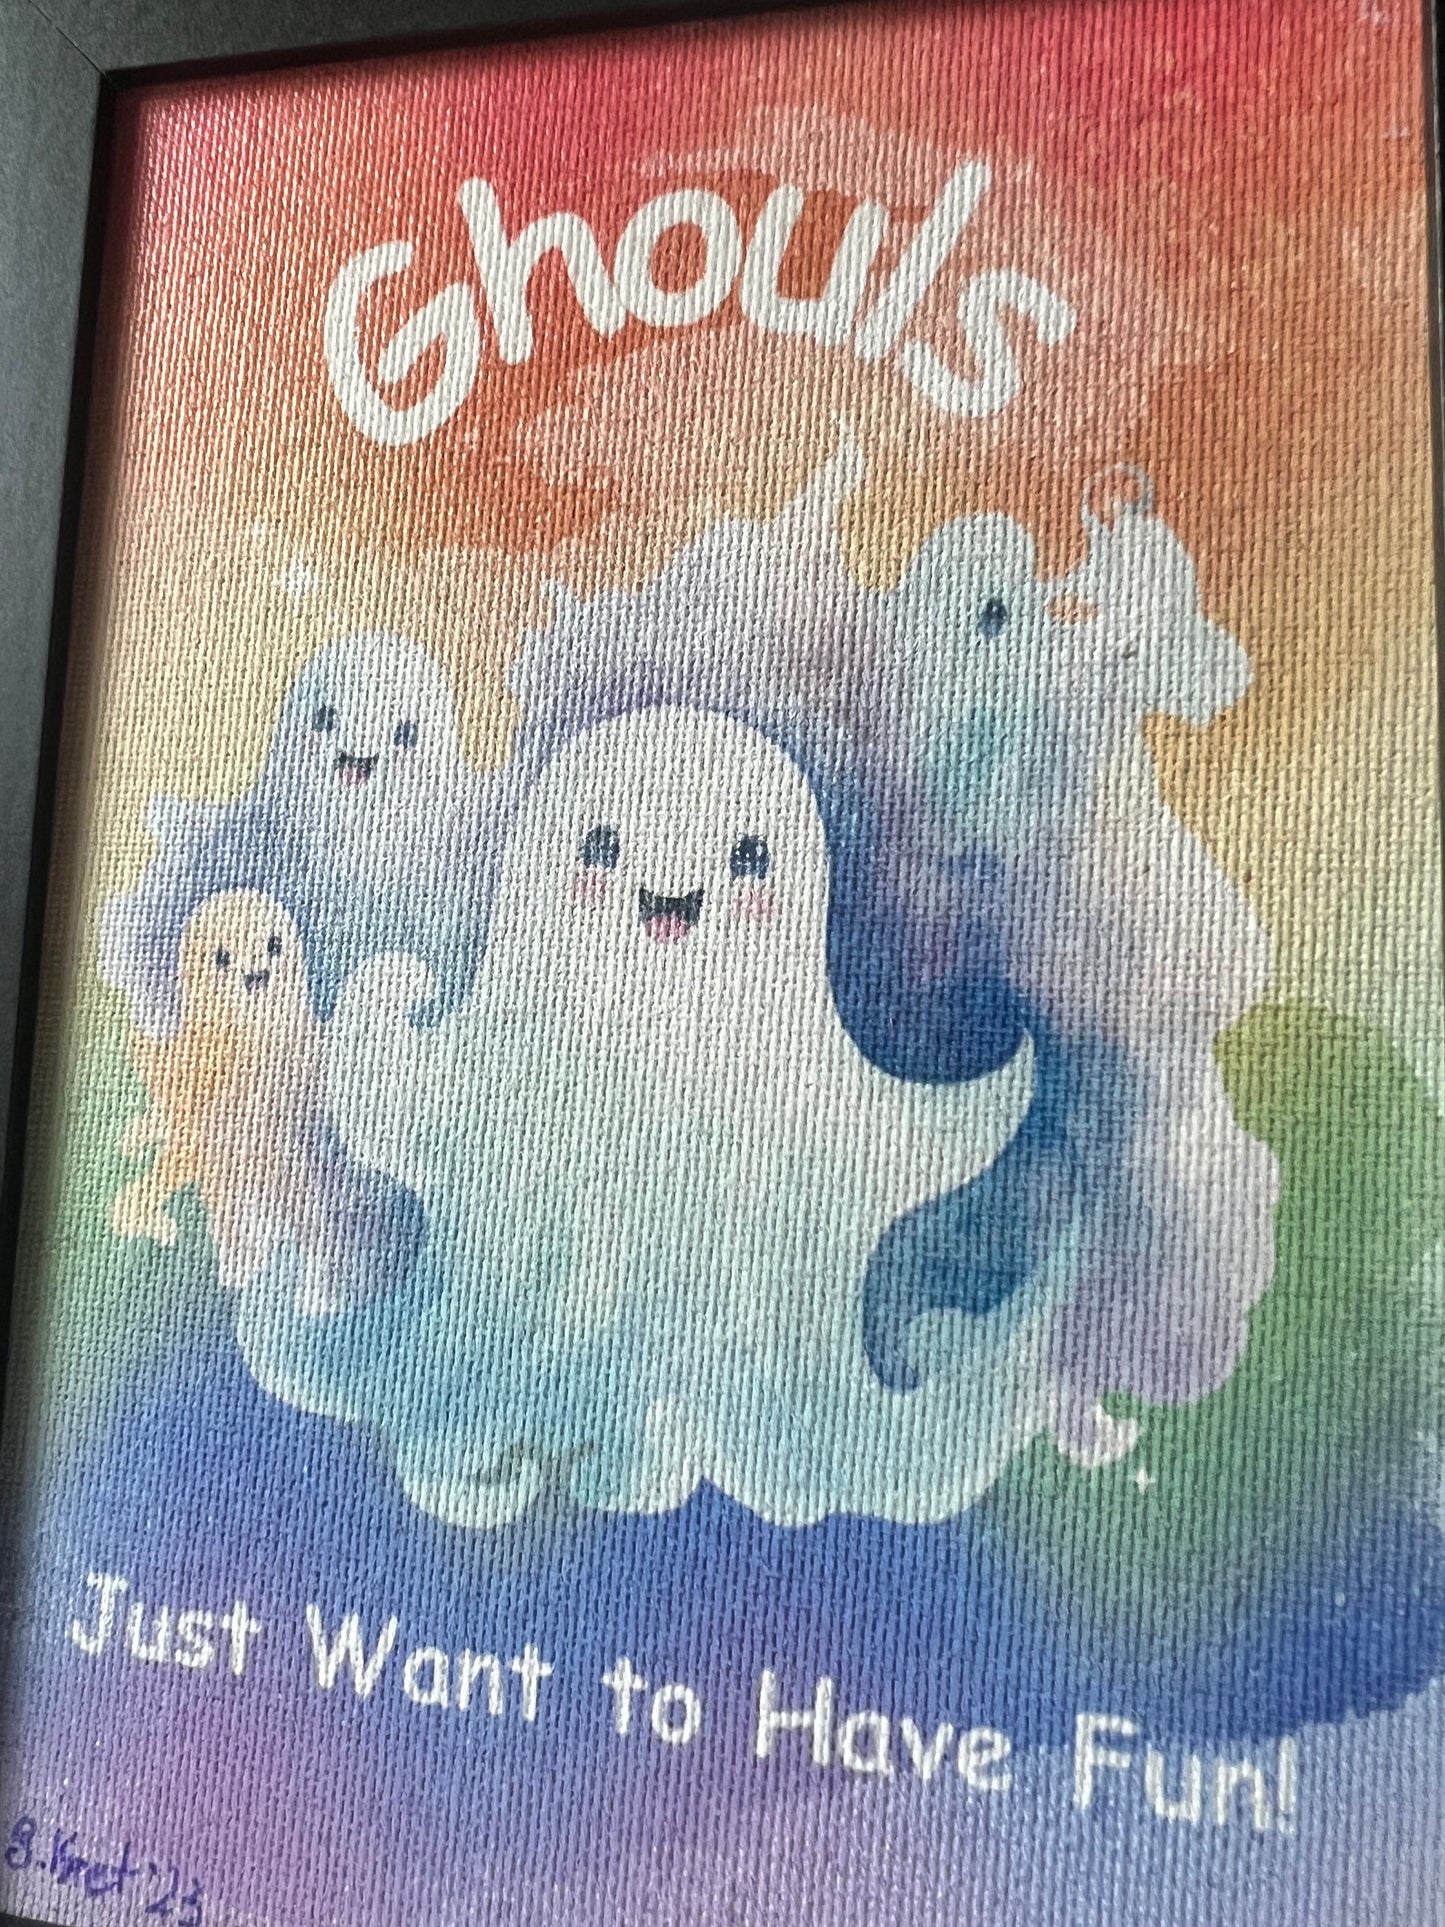 Cute Ghost Framed Picture, Rainbow Background, Ghouls Just Want To Have Fun